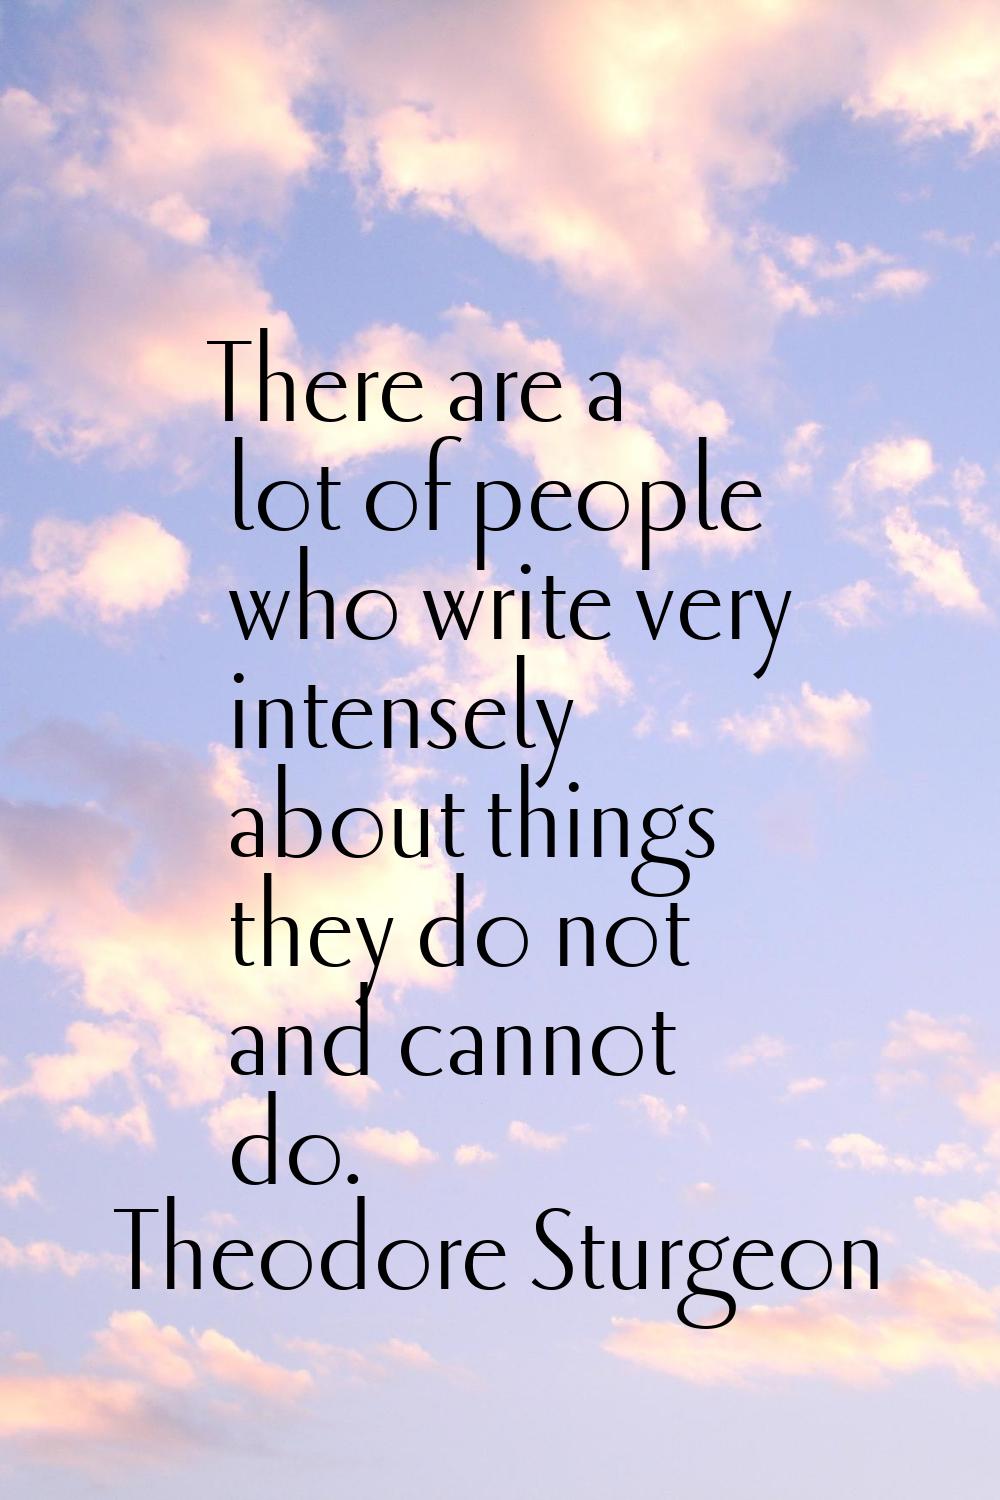 There are a lot of people who write very intensely about things they do not and cannot do.